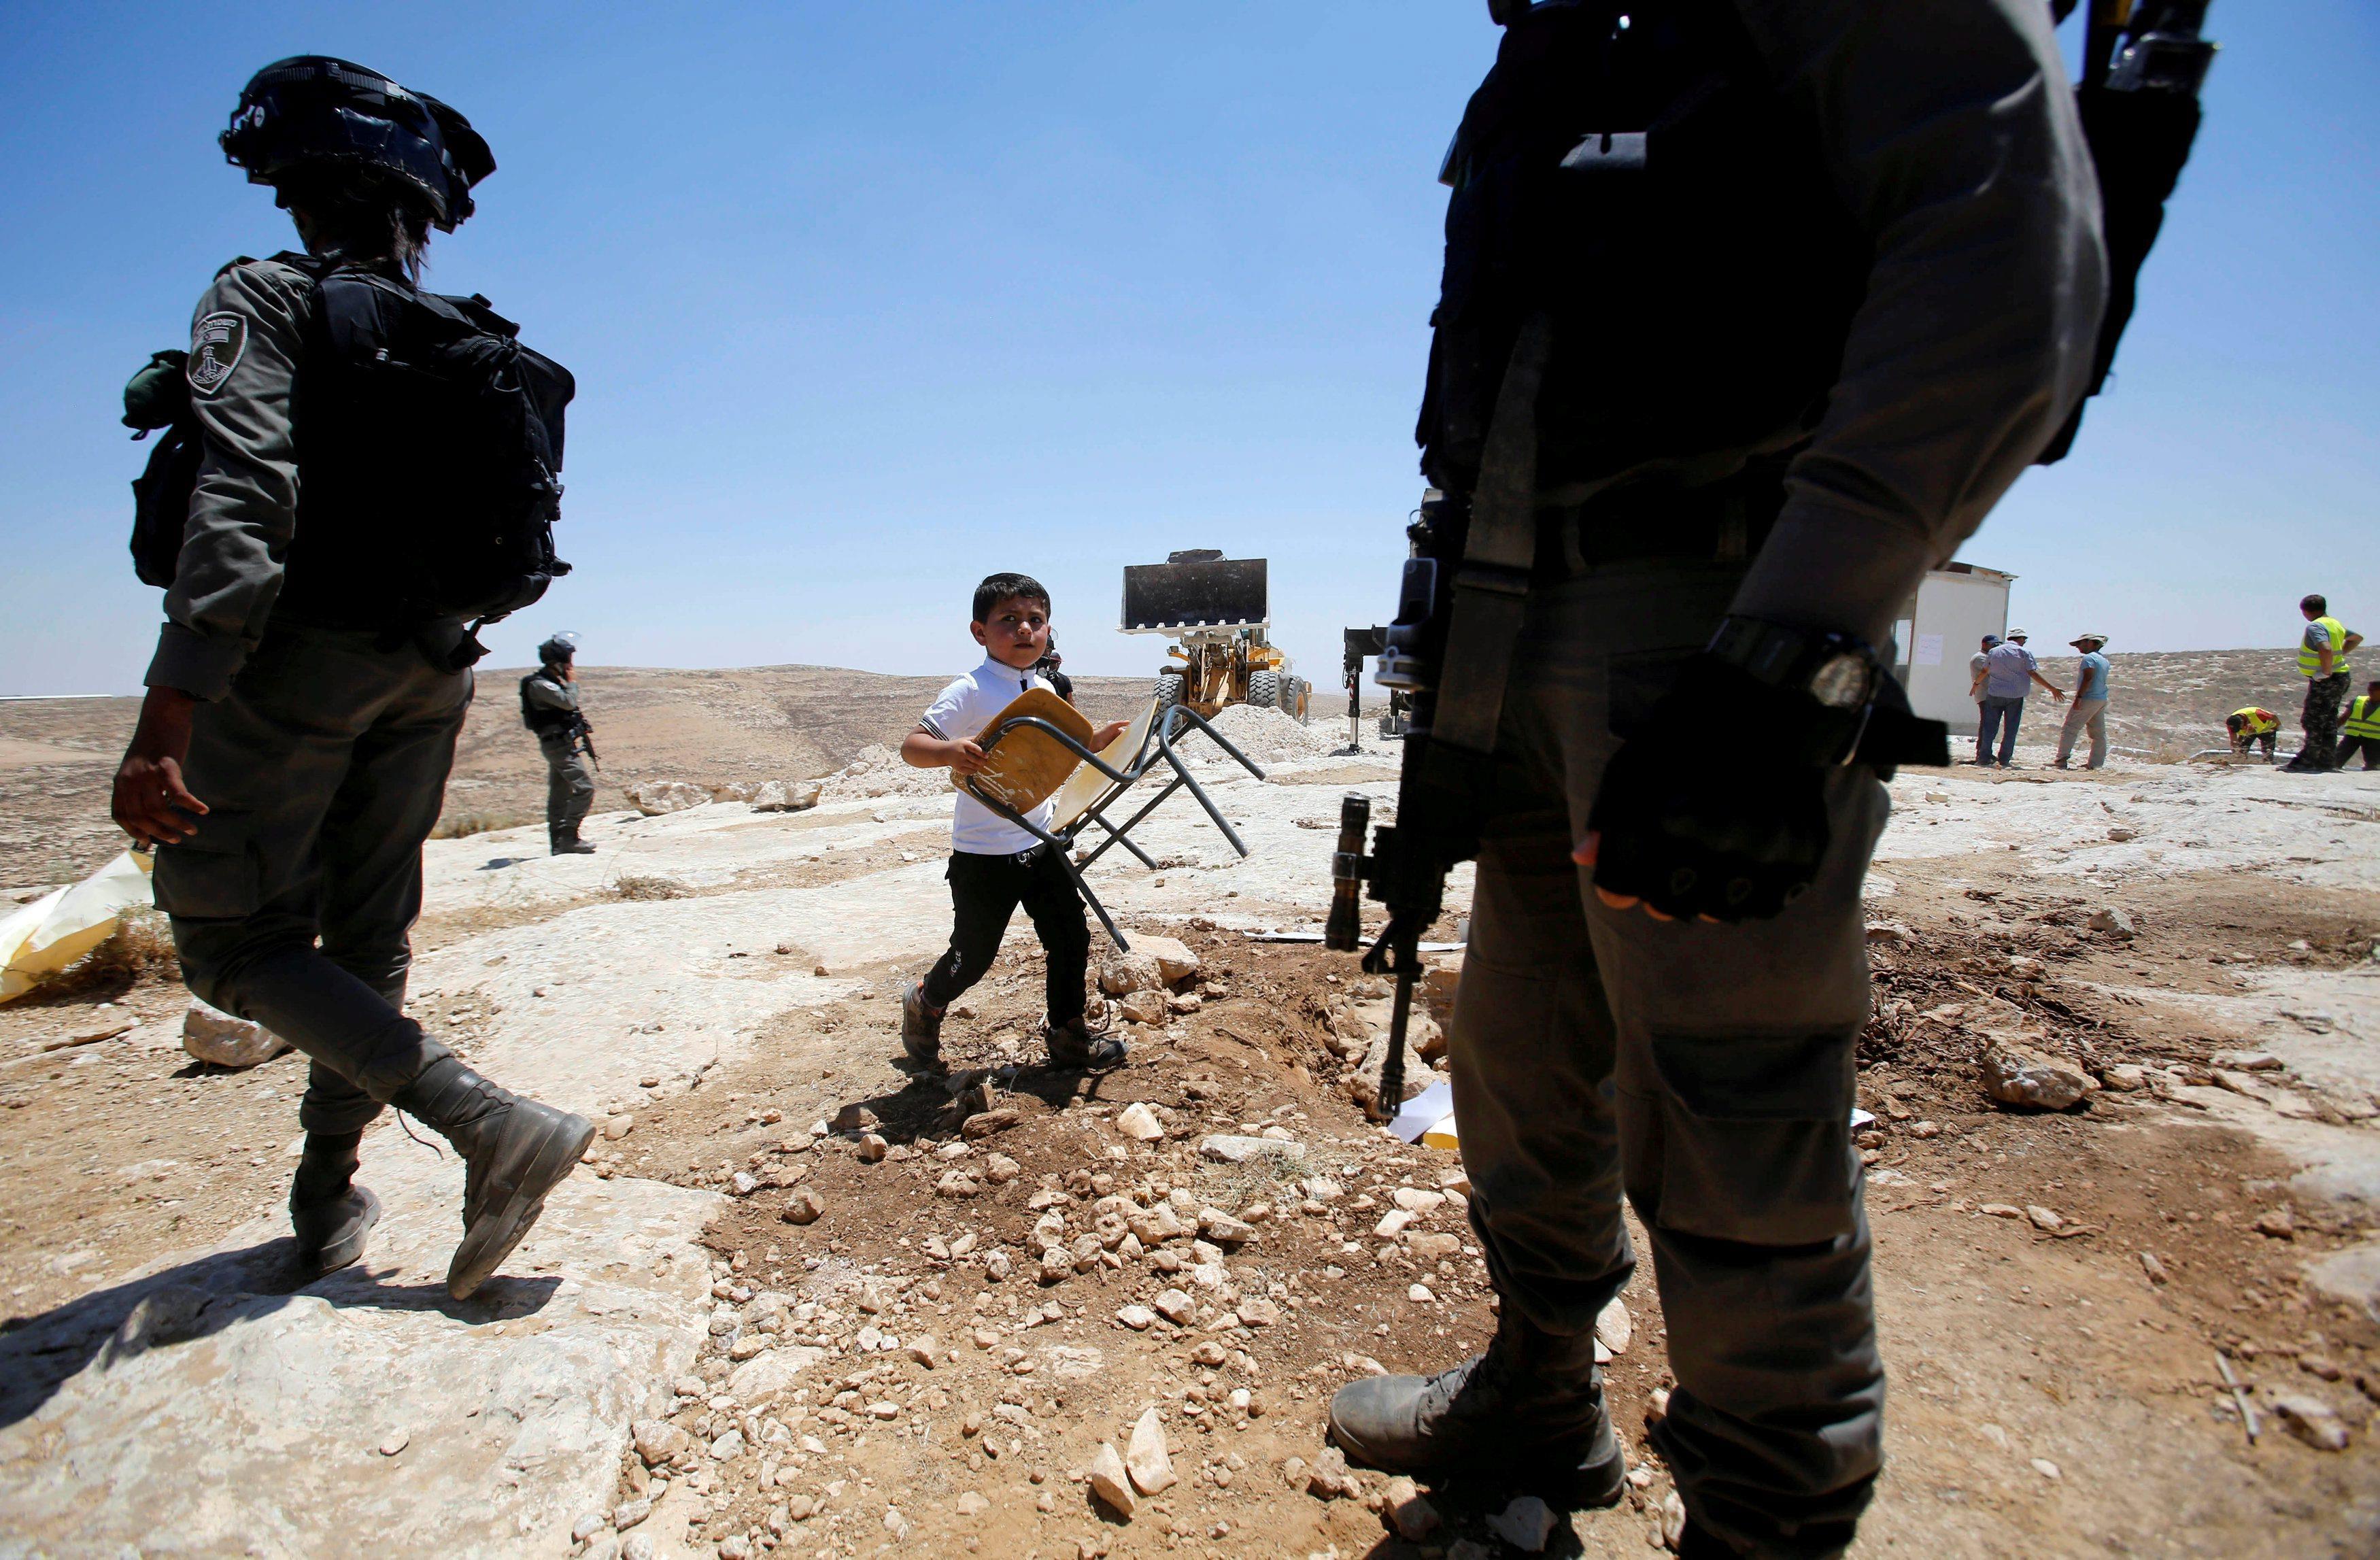 Palestinian boy carries a chair as the Israeli army removes containers used a school, near Hebron in